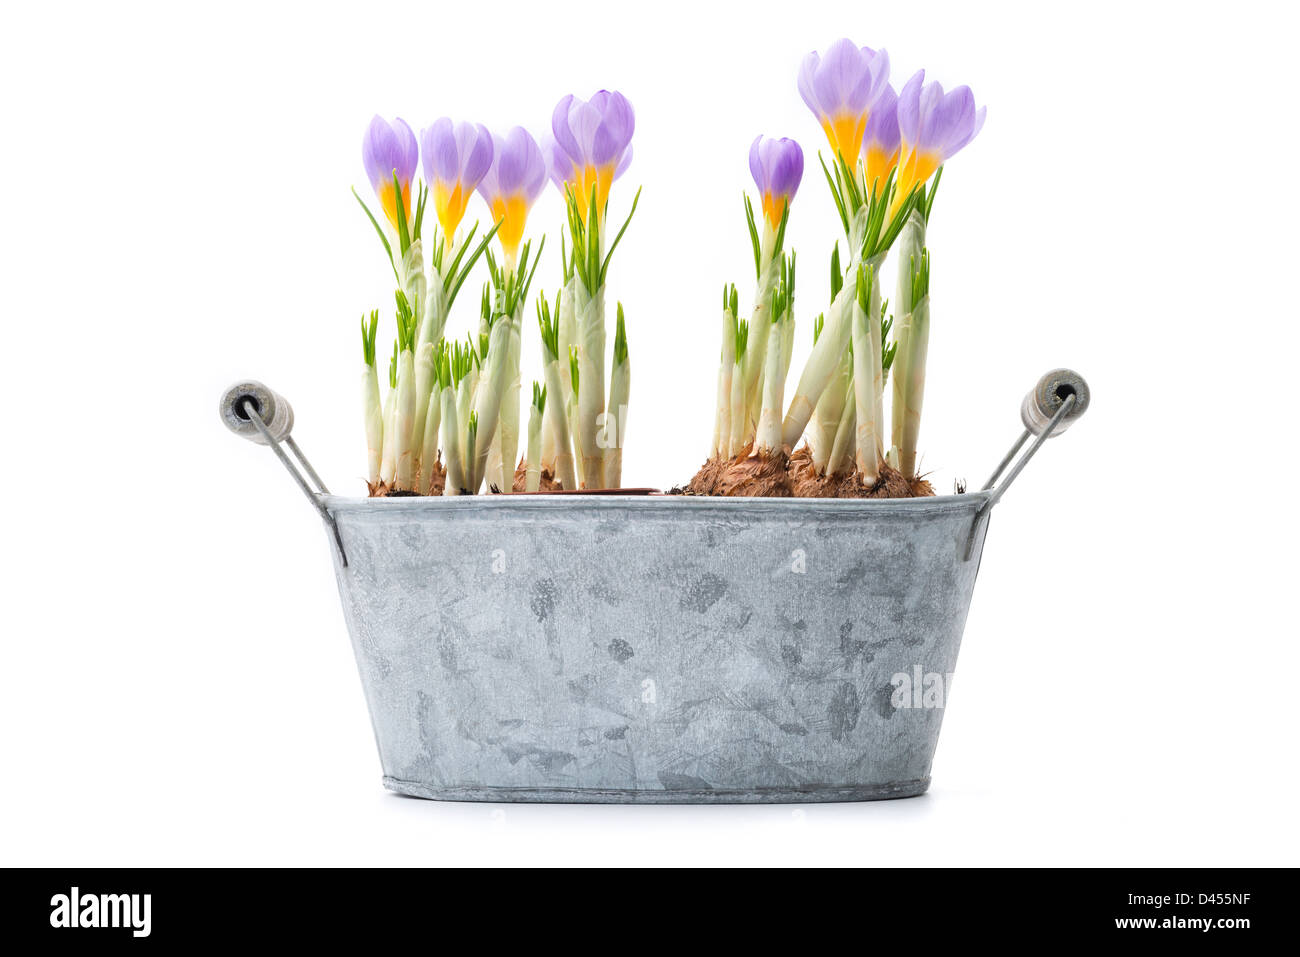 Flowers: group of blue crocuses, isolated on white background Stock Photo